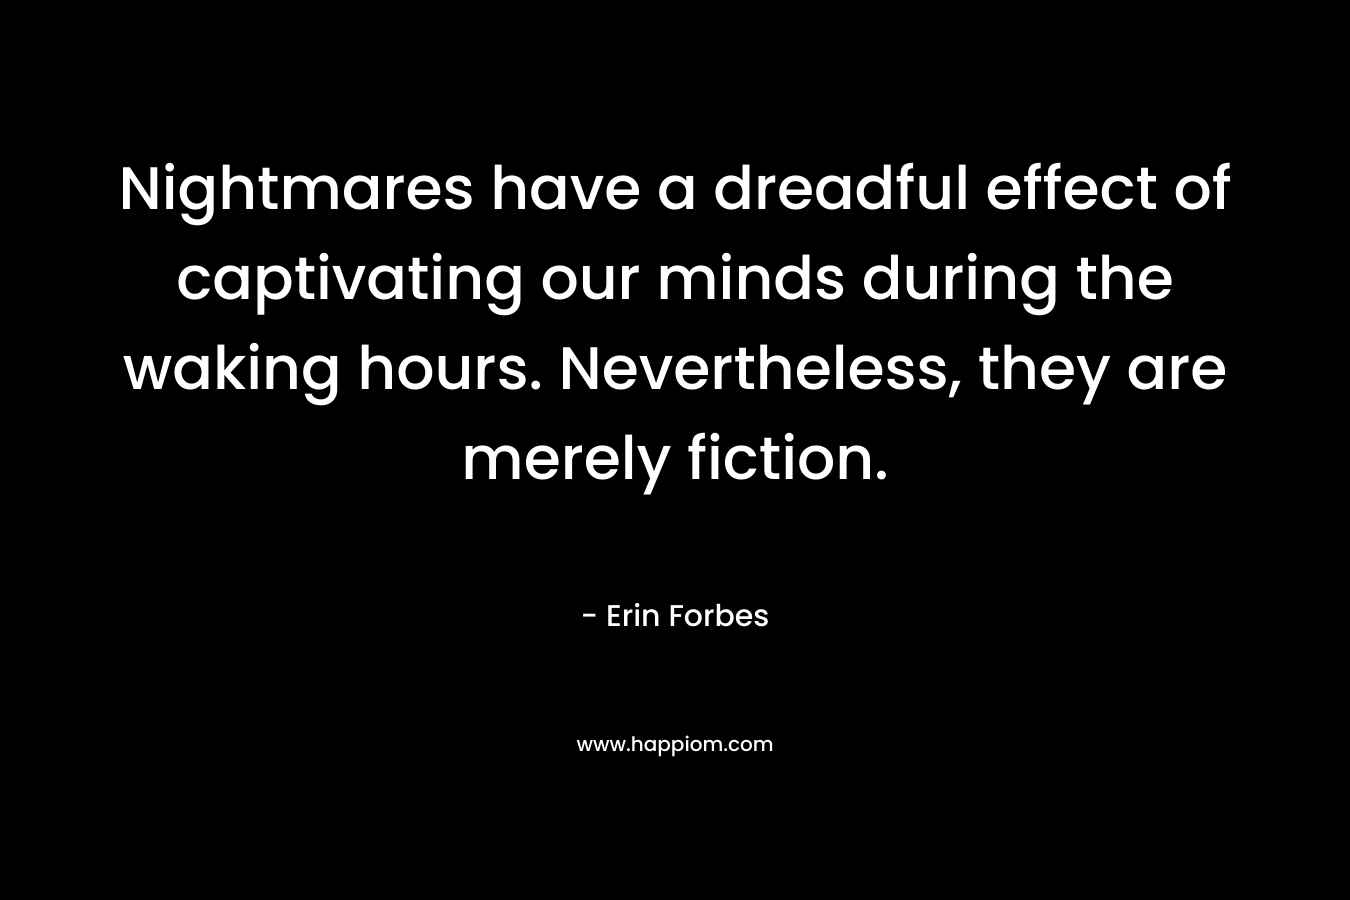 Nightmares have a dreadful effect of captivating our minds during the waking hours. Nevertheless, they are merely fiction. – Erin Forbes